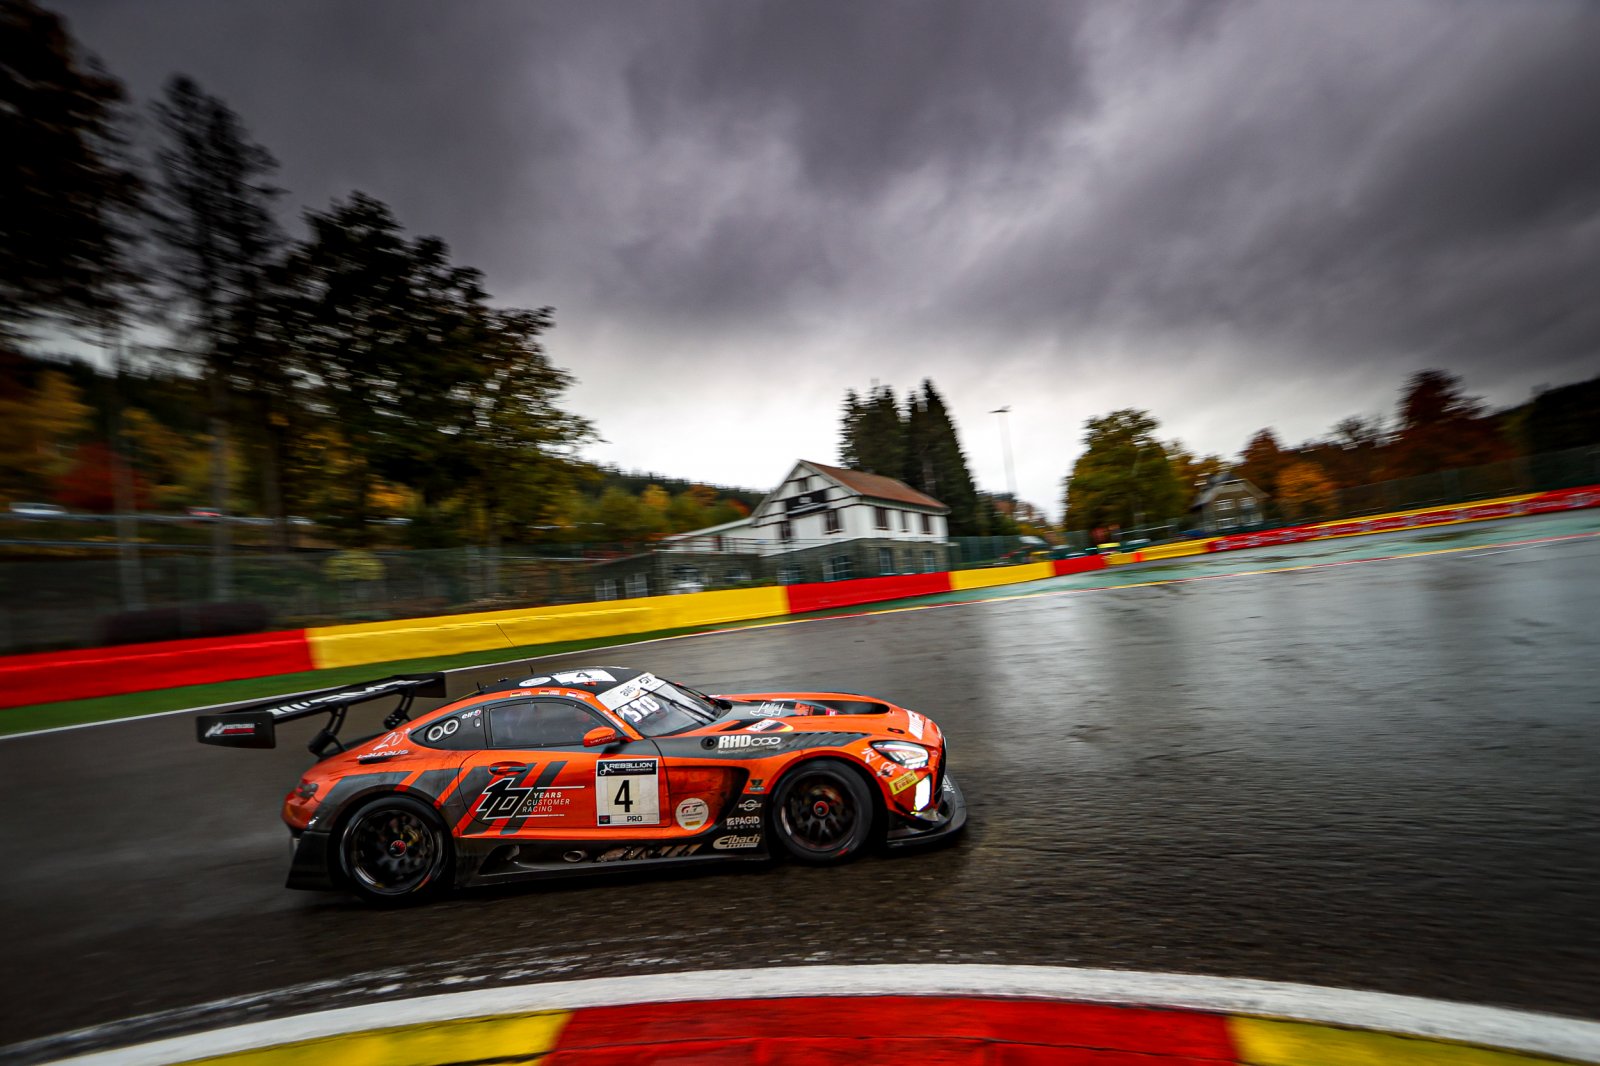 Mercedes-AMG names strengthened driver roster, targets Total 24 Hours of Spa glory